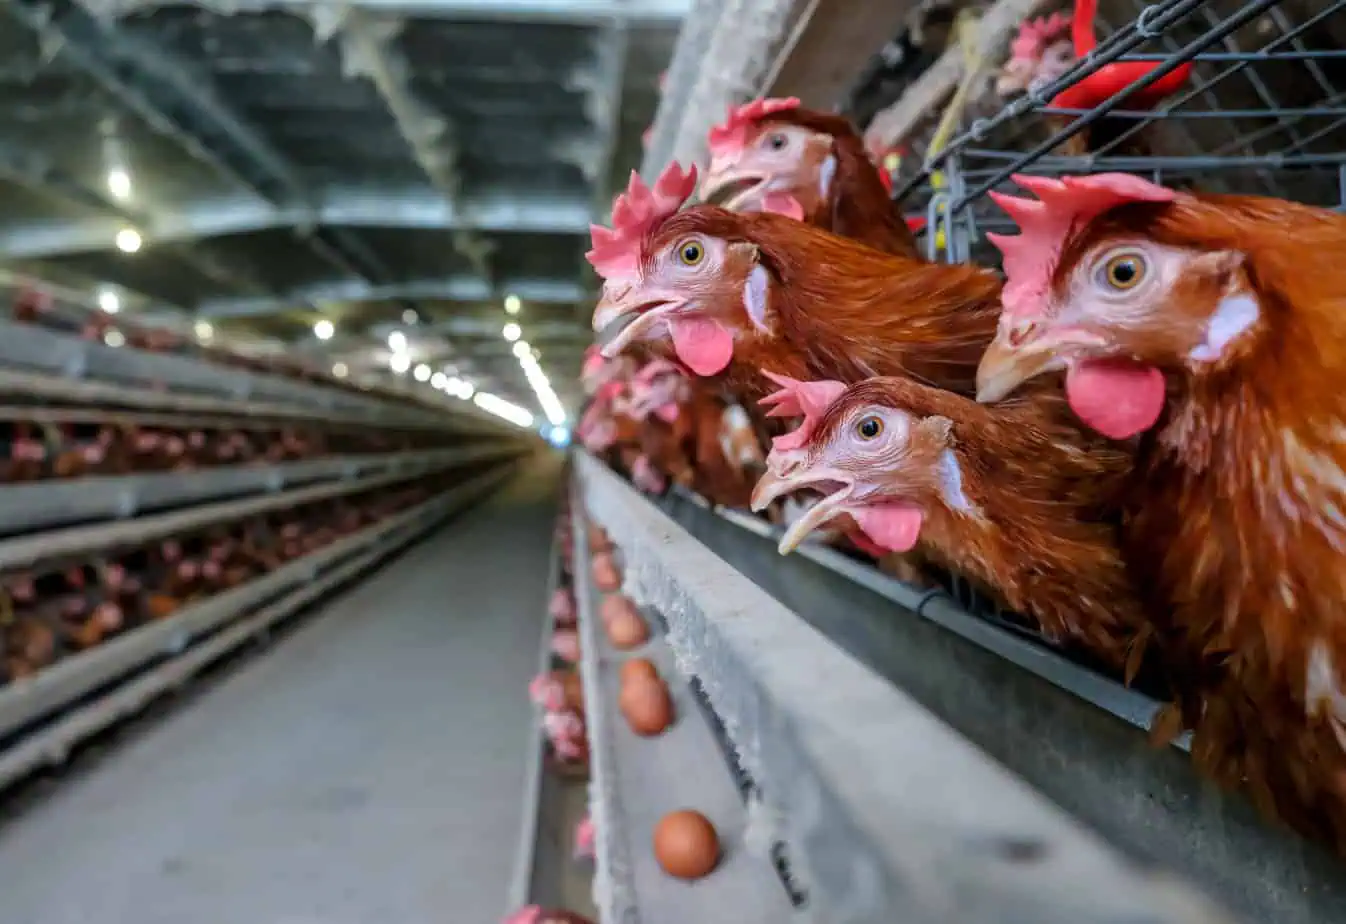 Major US Egg Producer Cal-Maine Foods Faces Bird Flu Scare, Millions of Chickens Affected